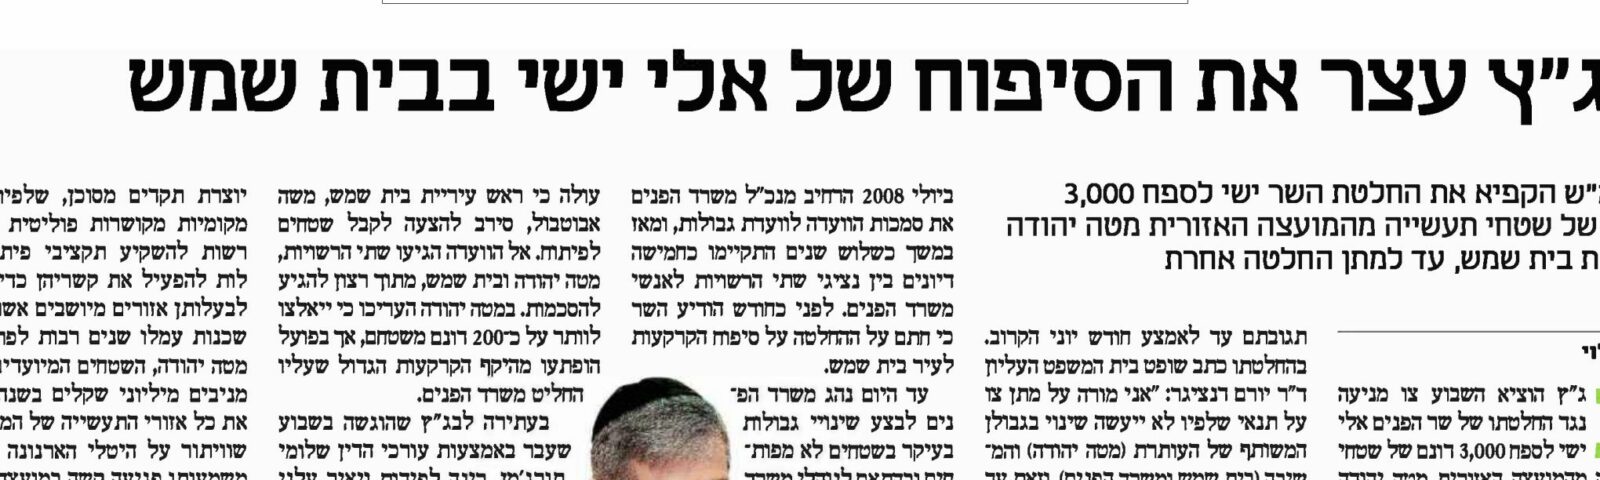 Calcalist: A blow to Eli Yishai: The High Court froze the annexation of industrial areas from Mateh Yehuda to the city of Beit Shemesh